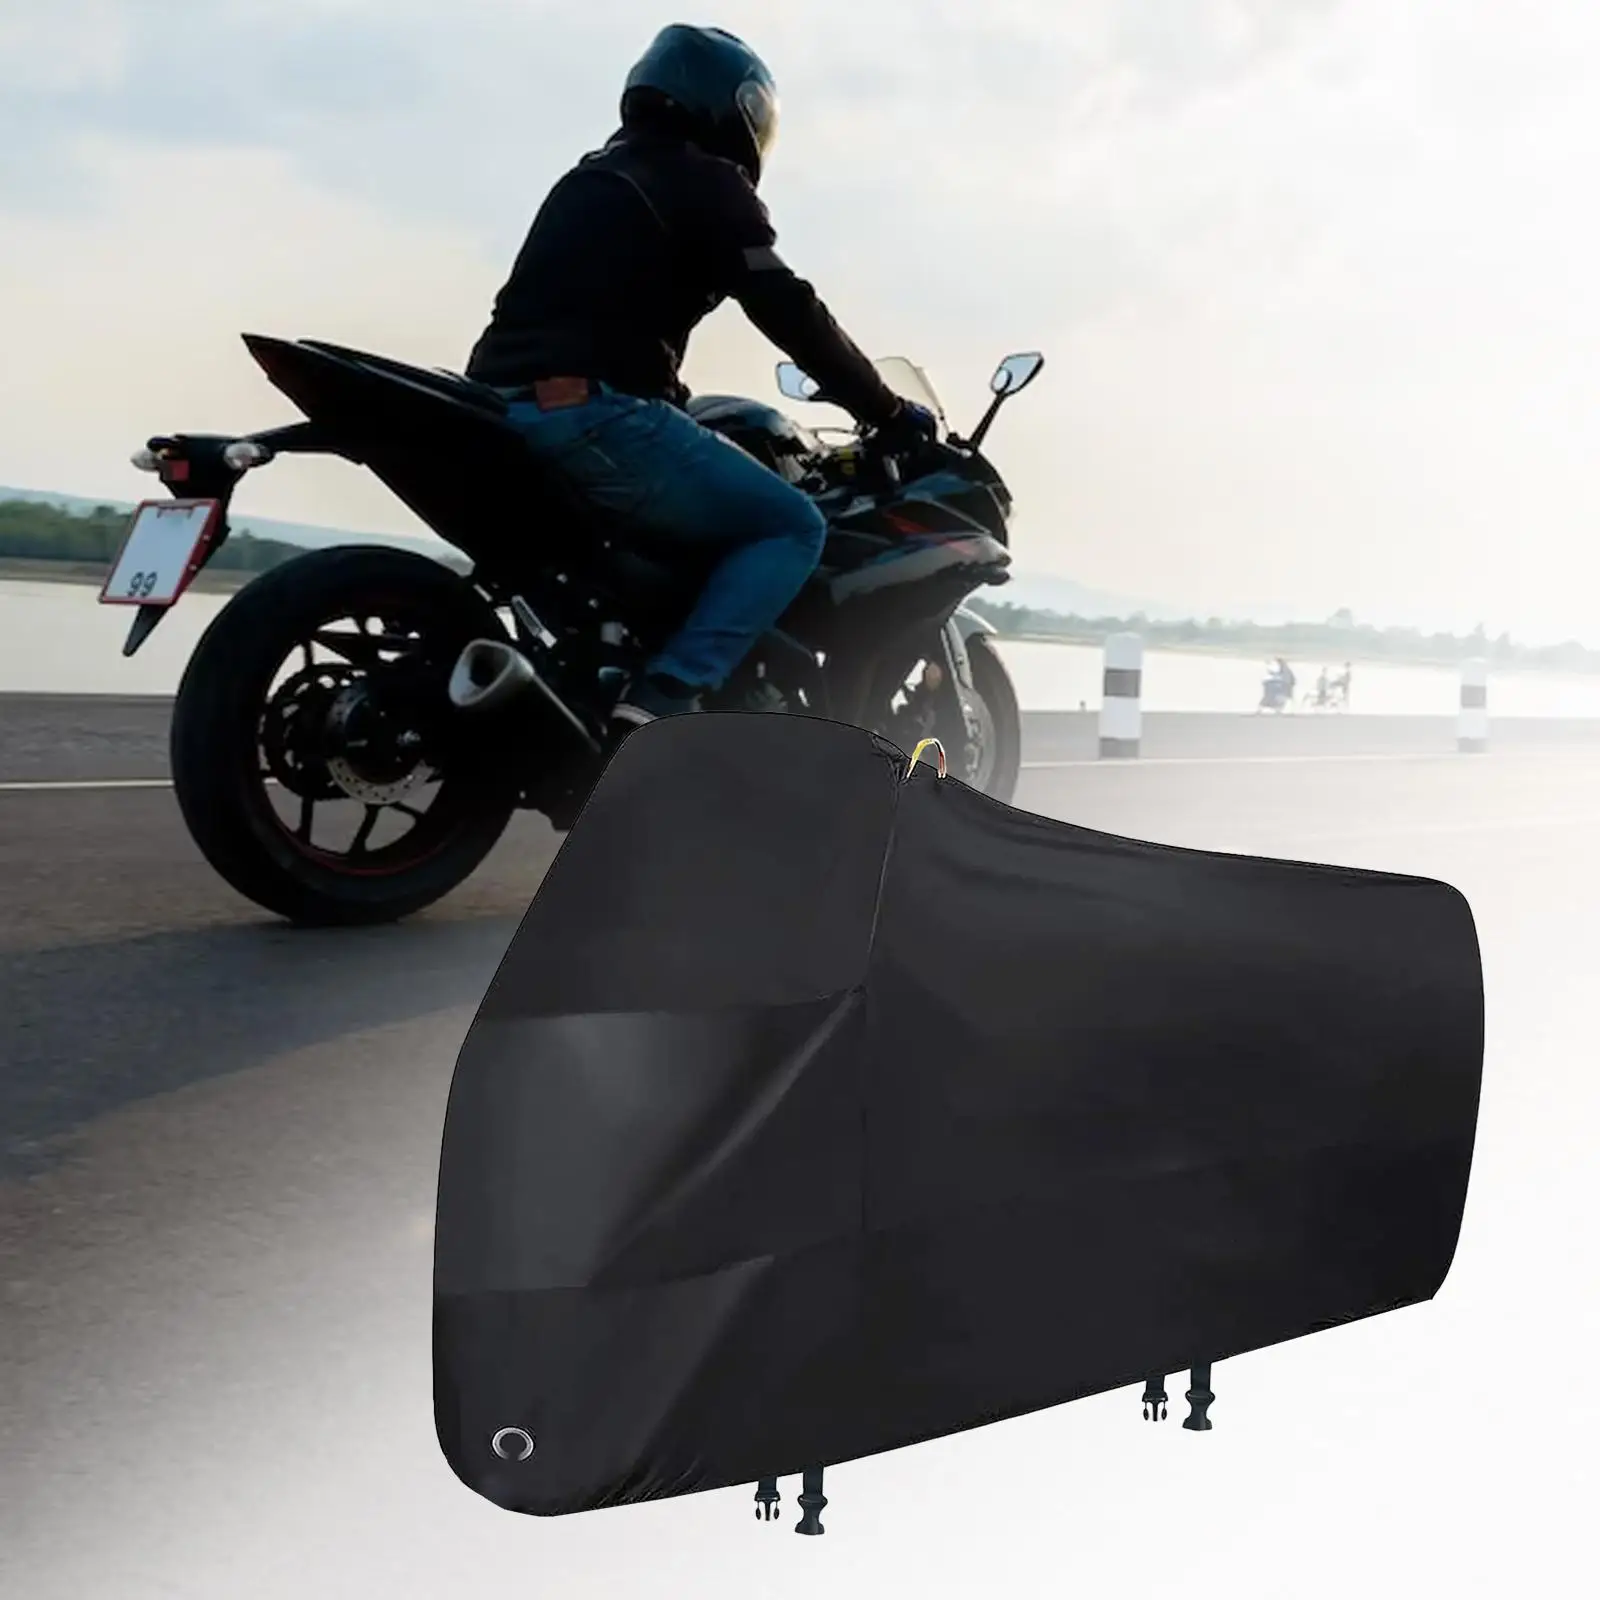 Motorcycle Cover Motorbike Waterproof Dustproof Cover Windproof 79x27.5x43inch Sturdy for All Season Protection